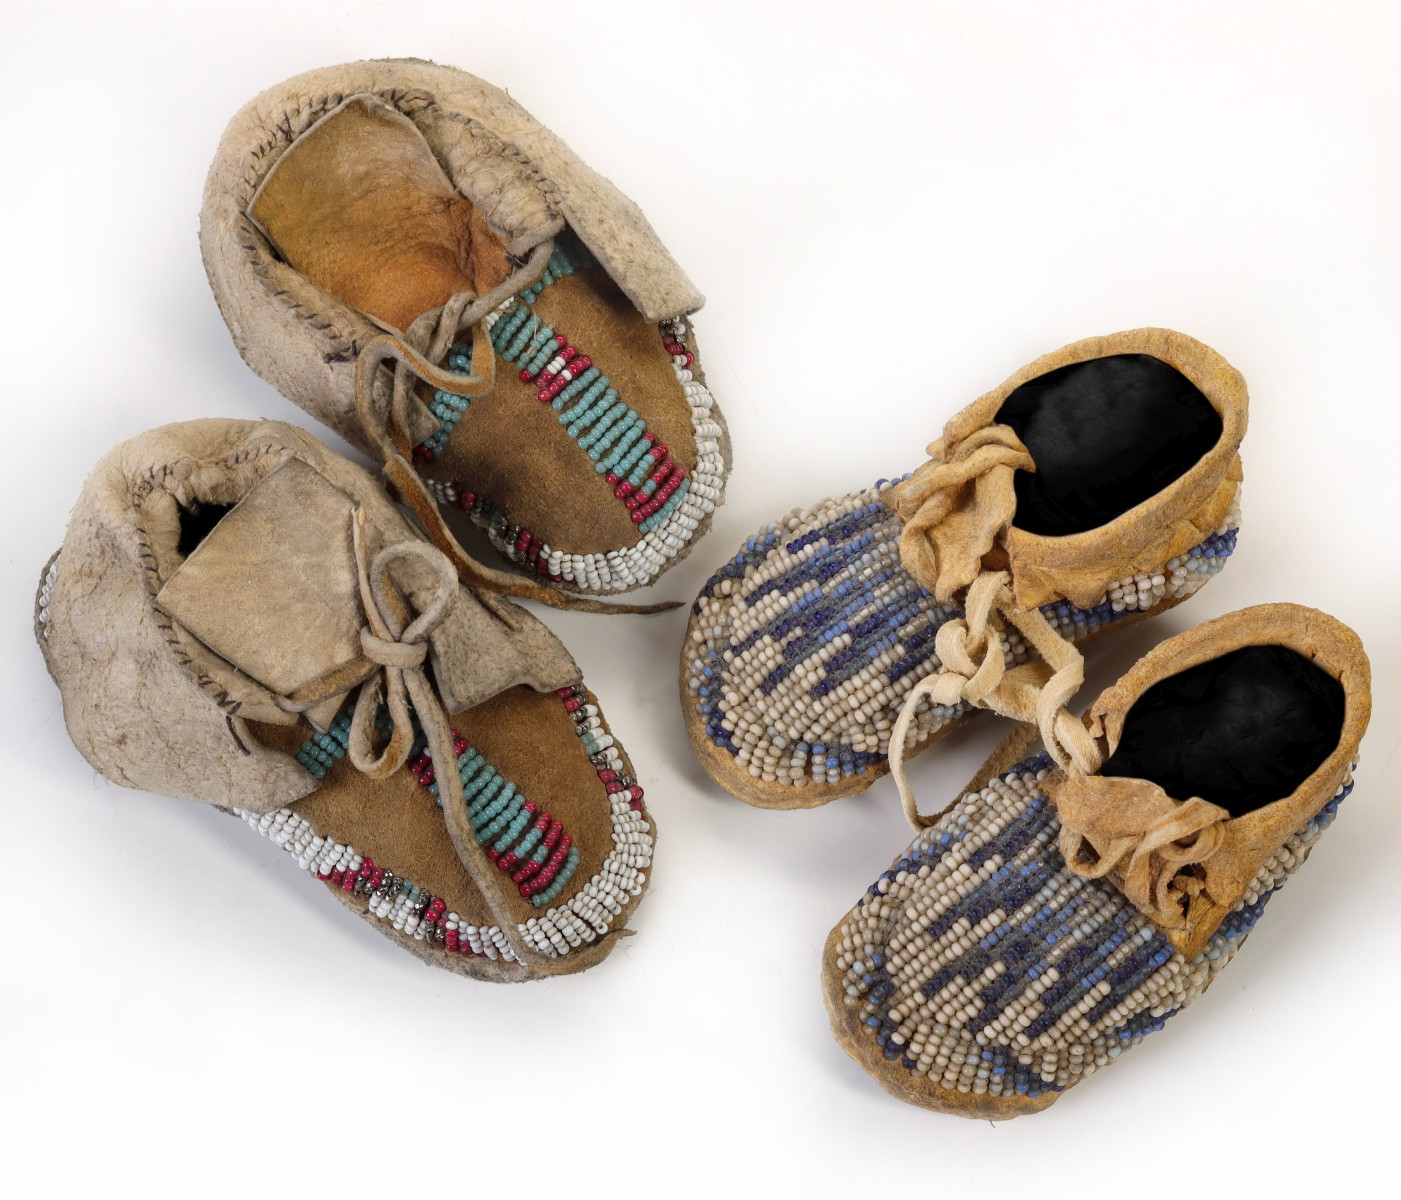 EARLY 20TH C. NORTHERN PLAINS CHILD'S MOCCASIN PAIRS